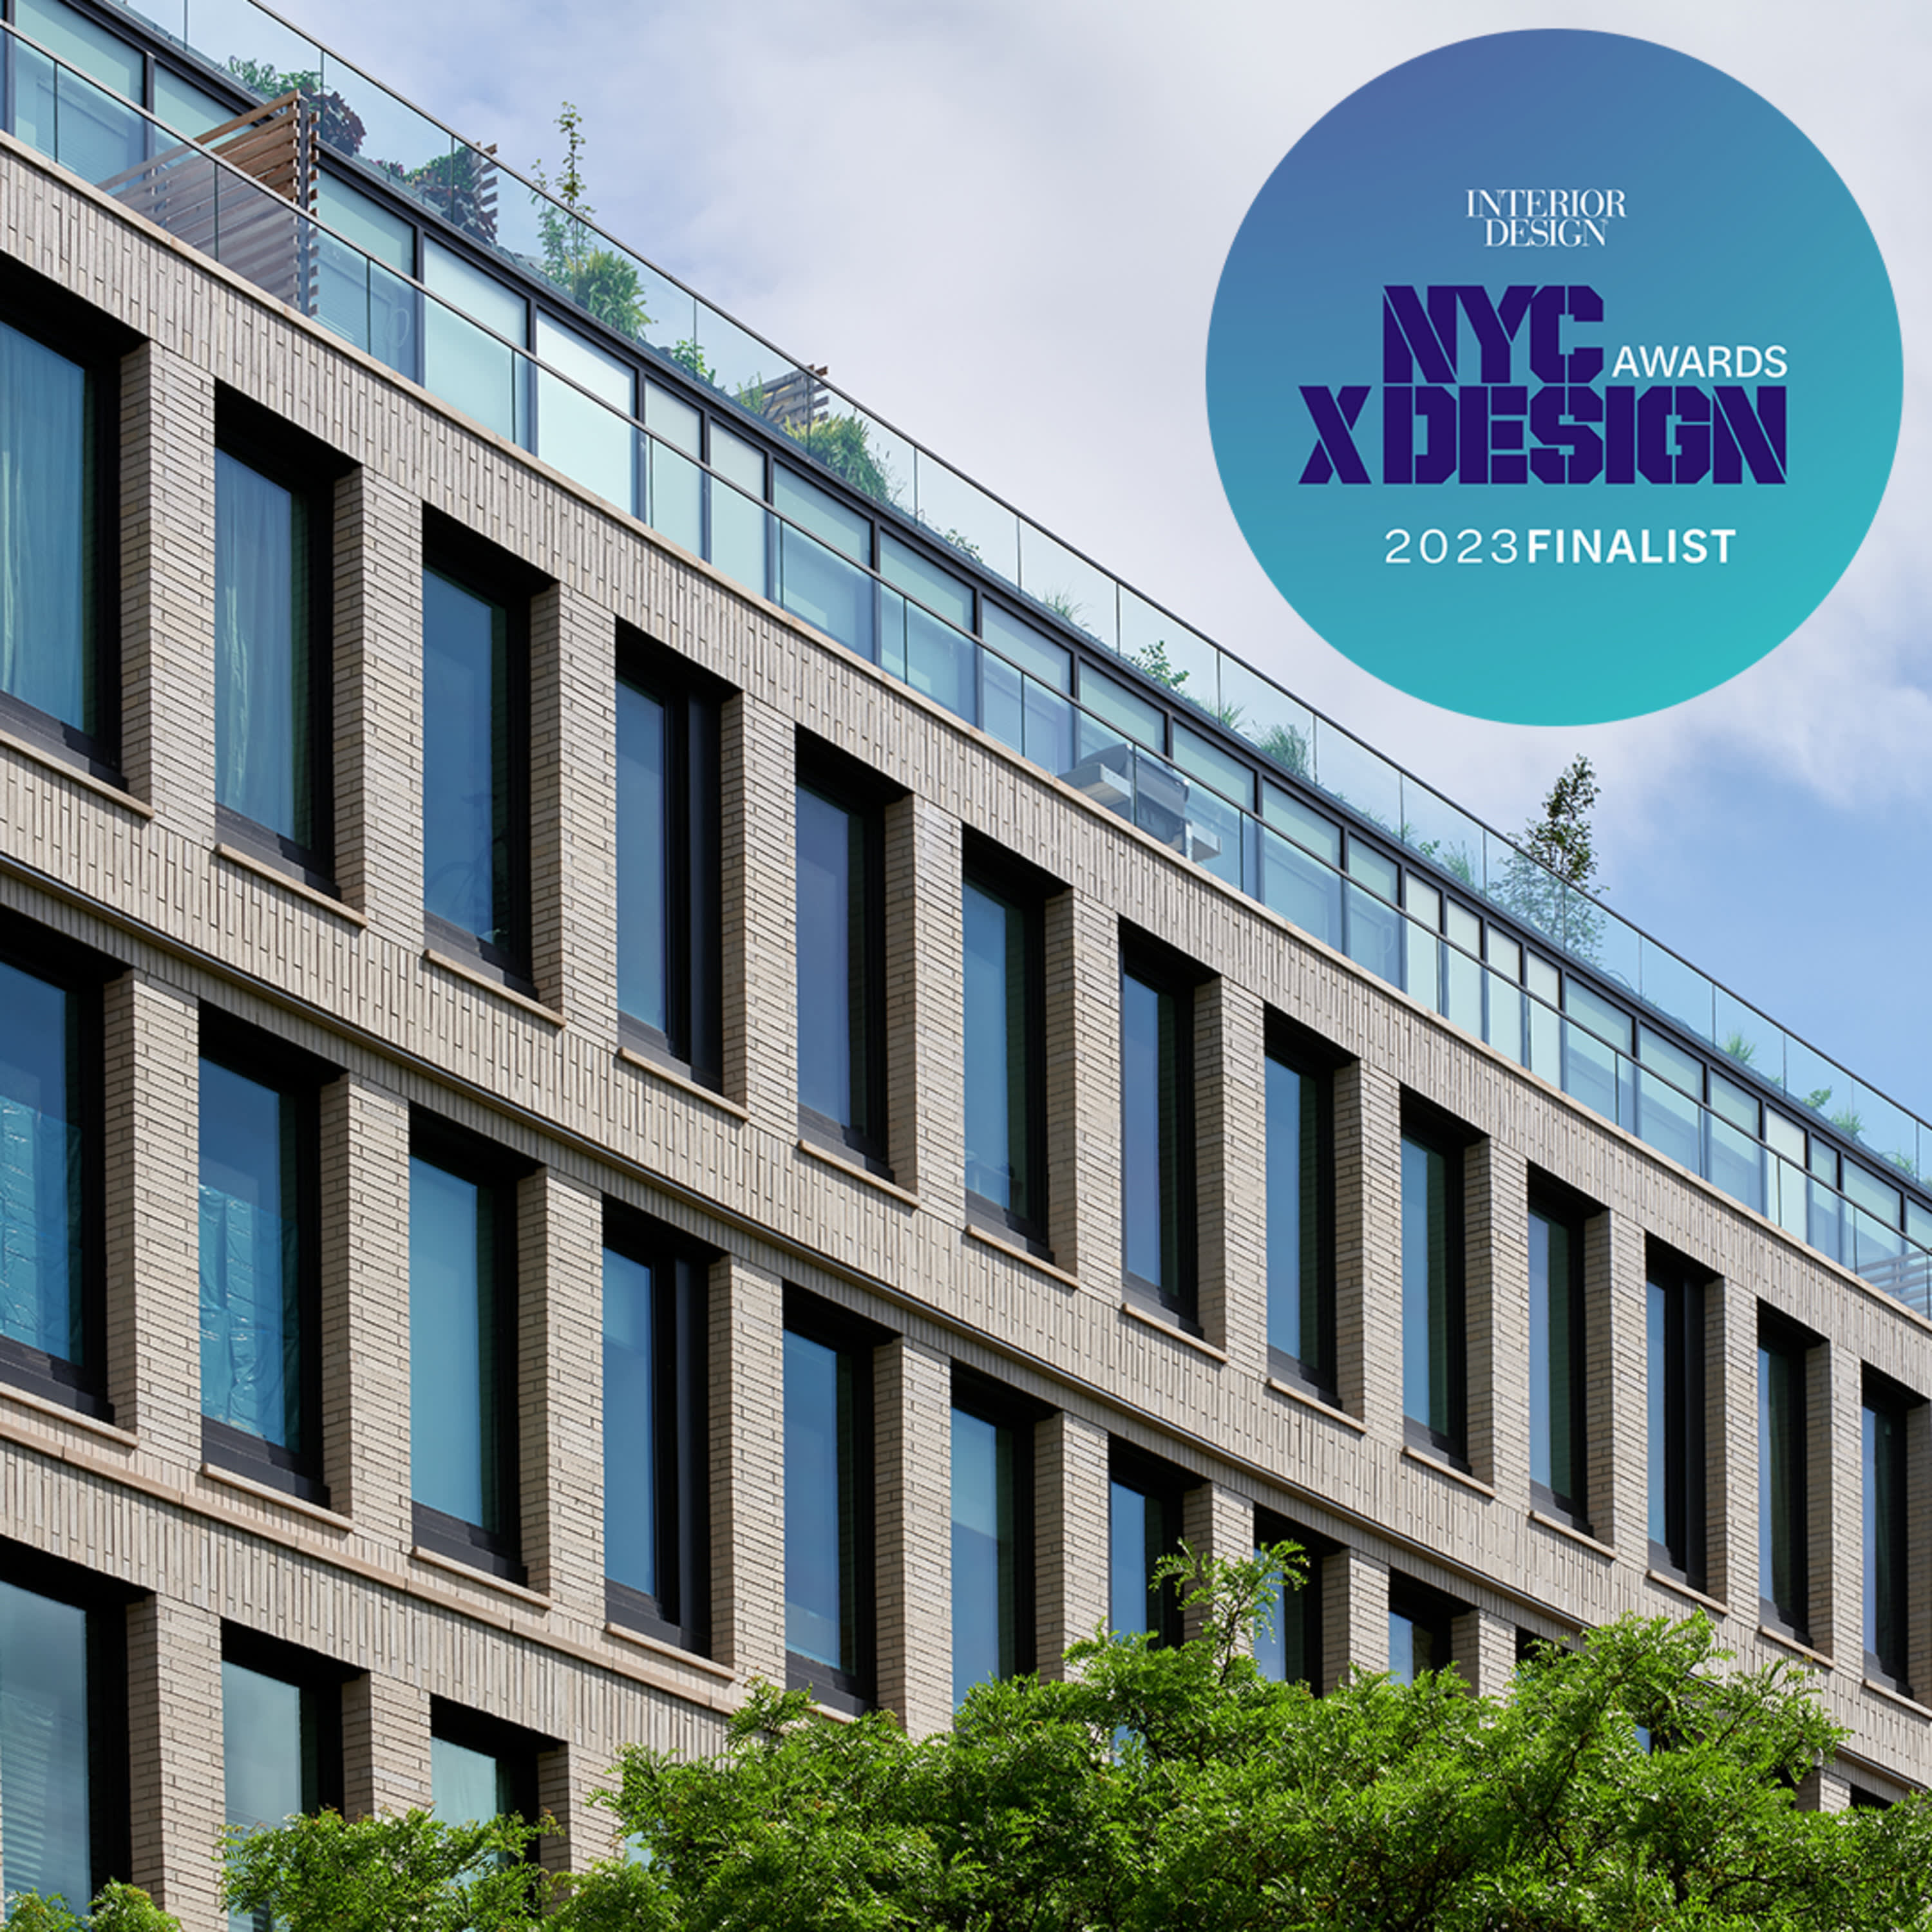 The Rowan Astoria shortlisted in the 2023 NYCxDESIGN Awards